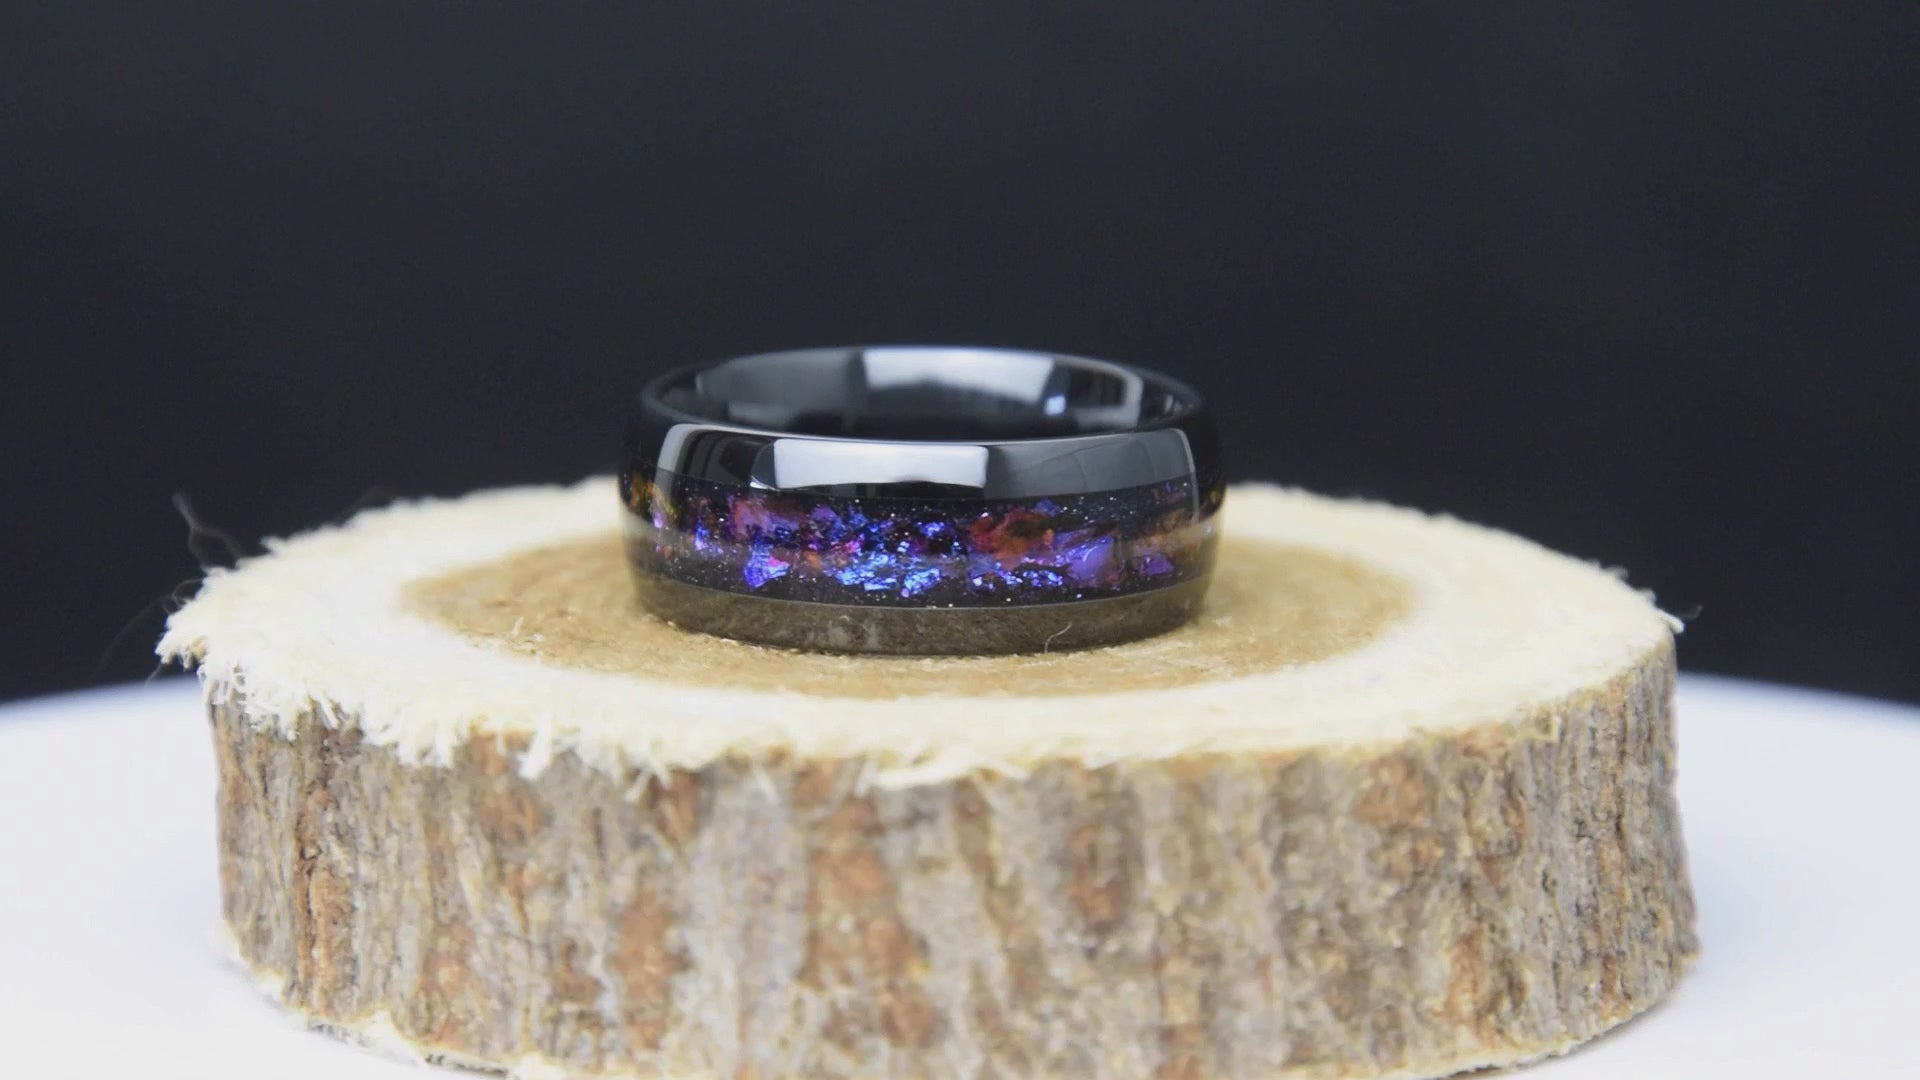 His and Hers Galaxy Black Ceramic Wedding Ring Set - Copperbeard Jewelry